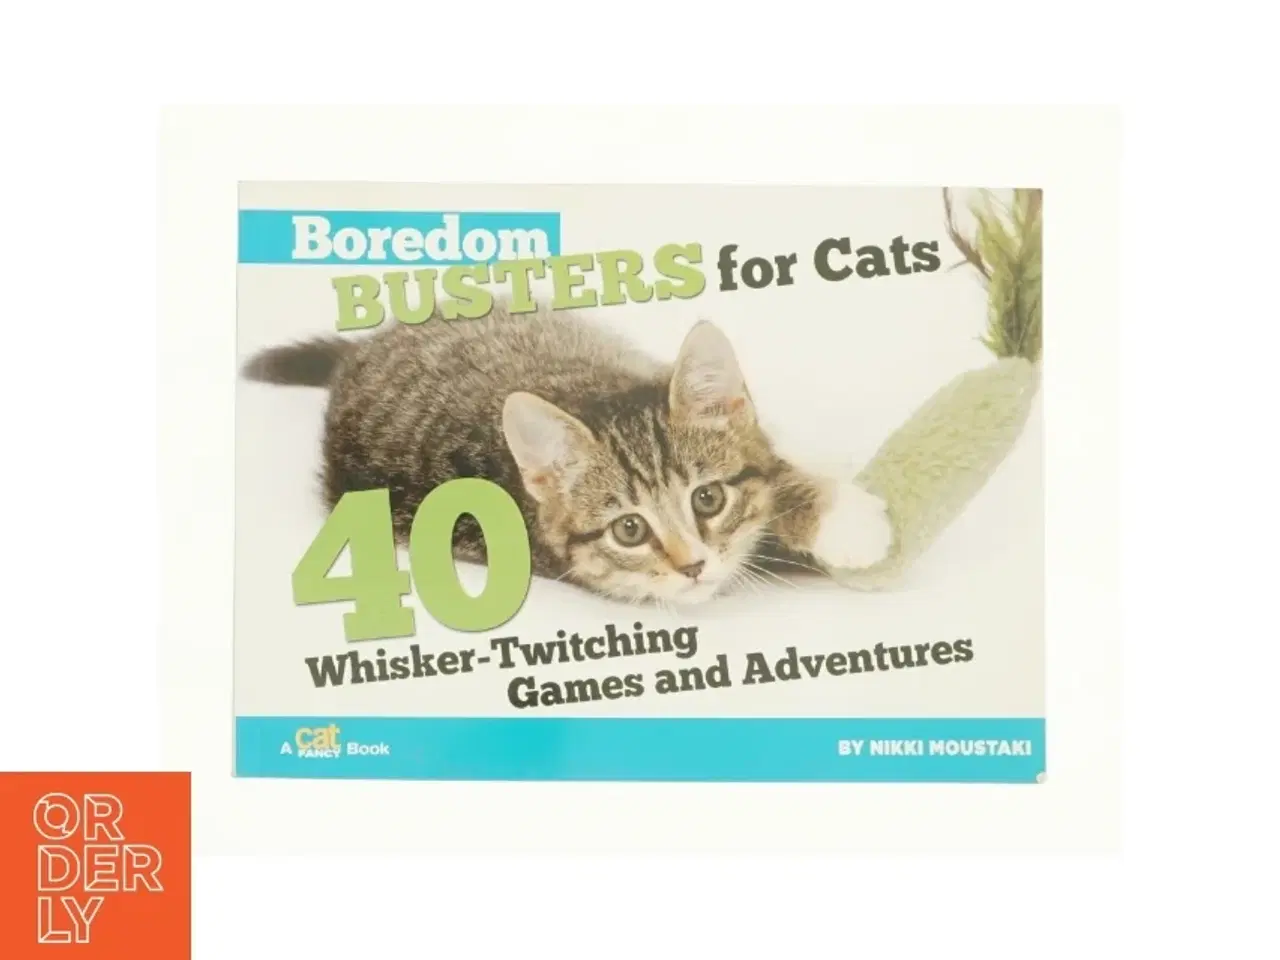 Billede 1 - Boredom Busters for Cats : 40 Whisker-Twitching Games and Adventures fra DVD